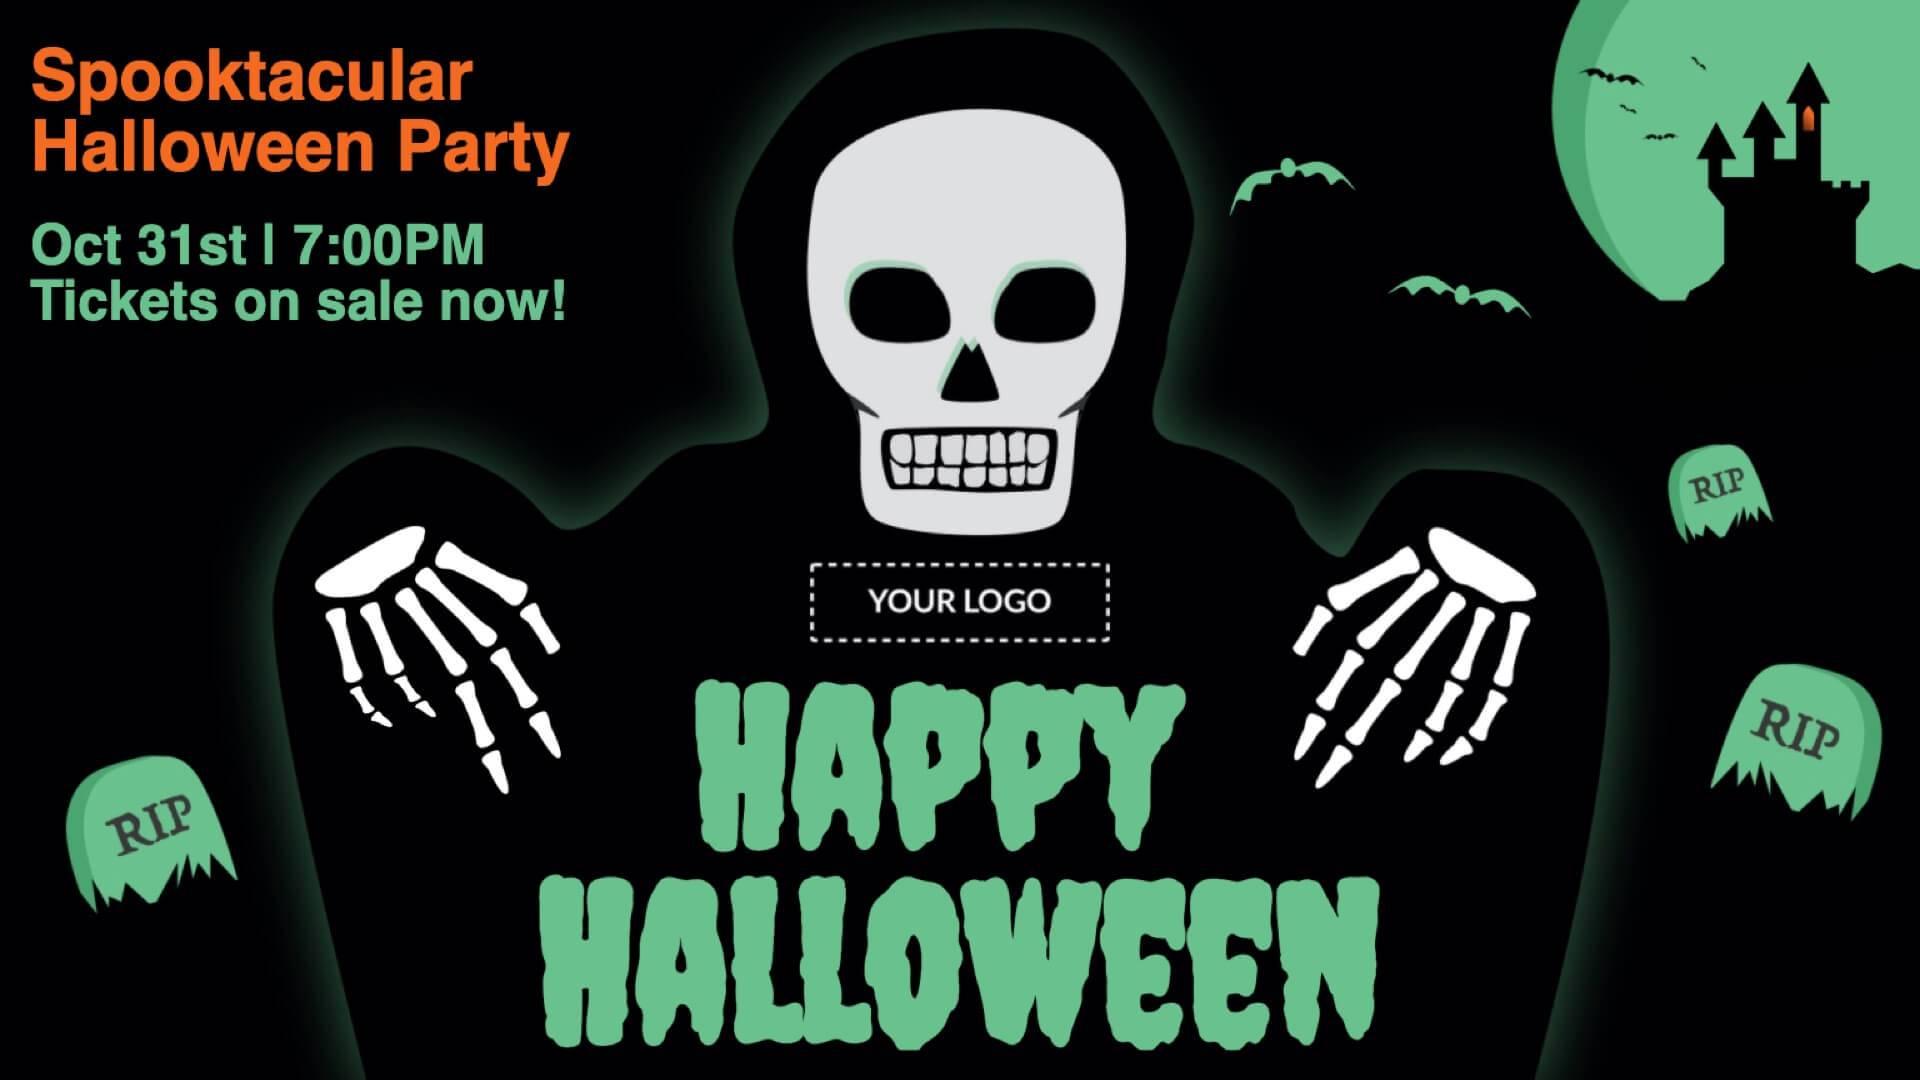 Holiday Halloween Party Digital Signage Template